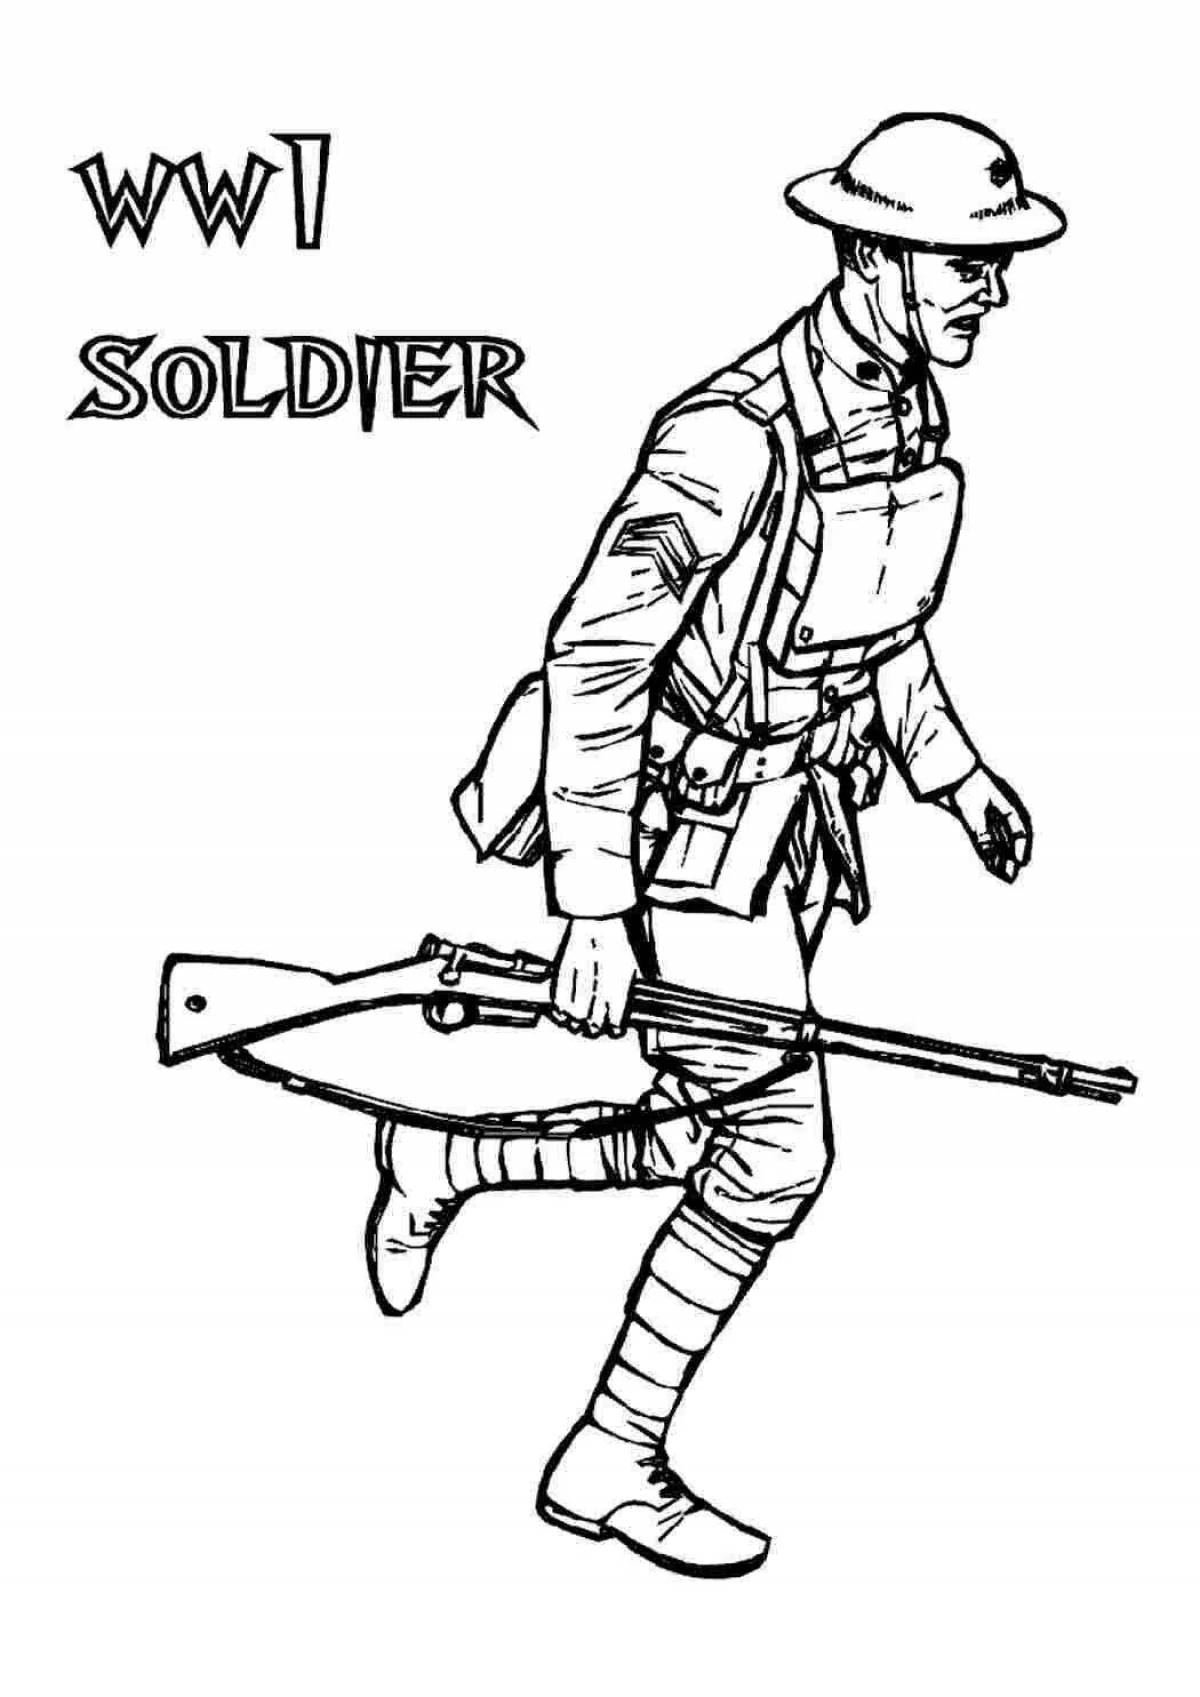 Intriguing WWII coloring book